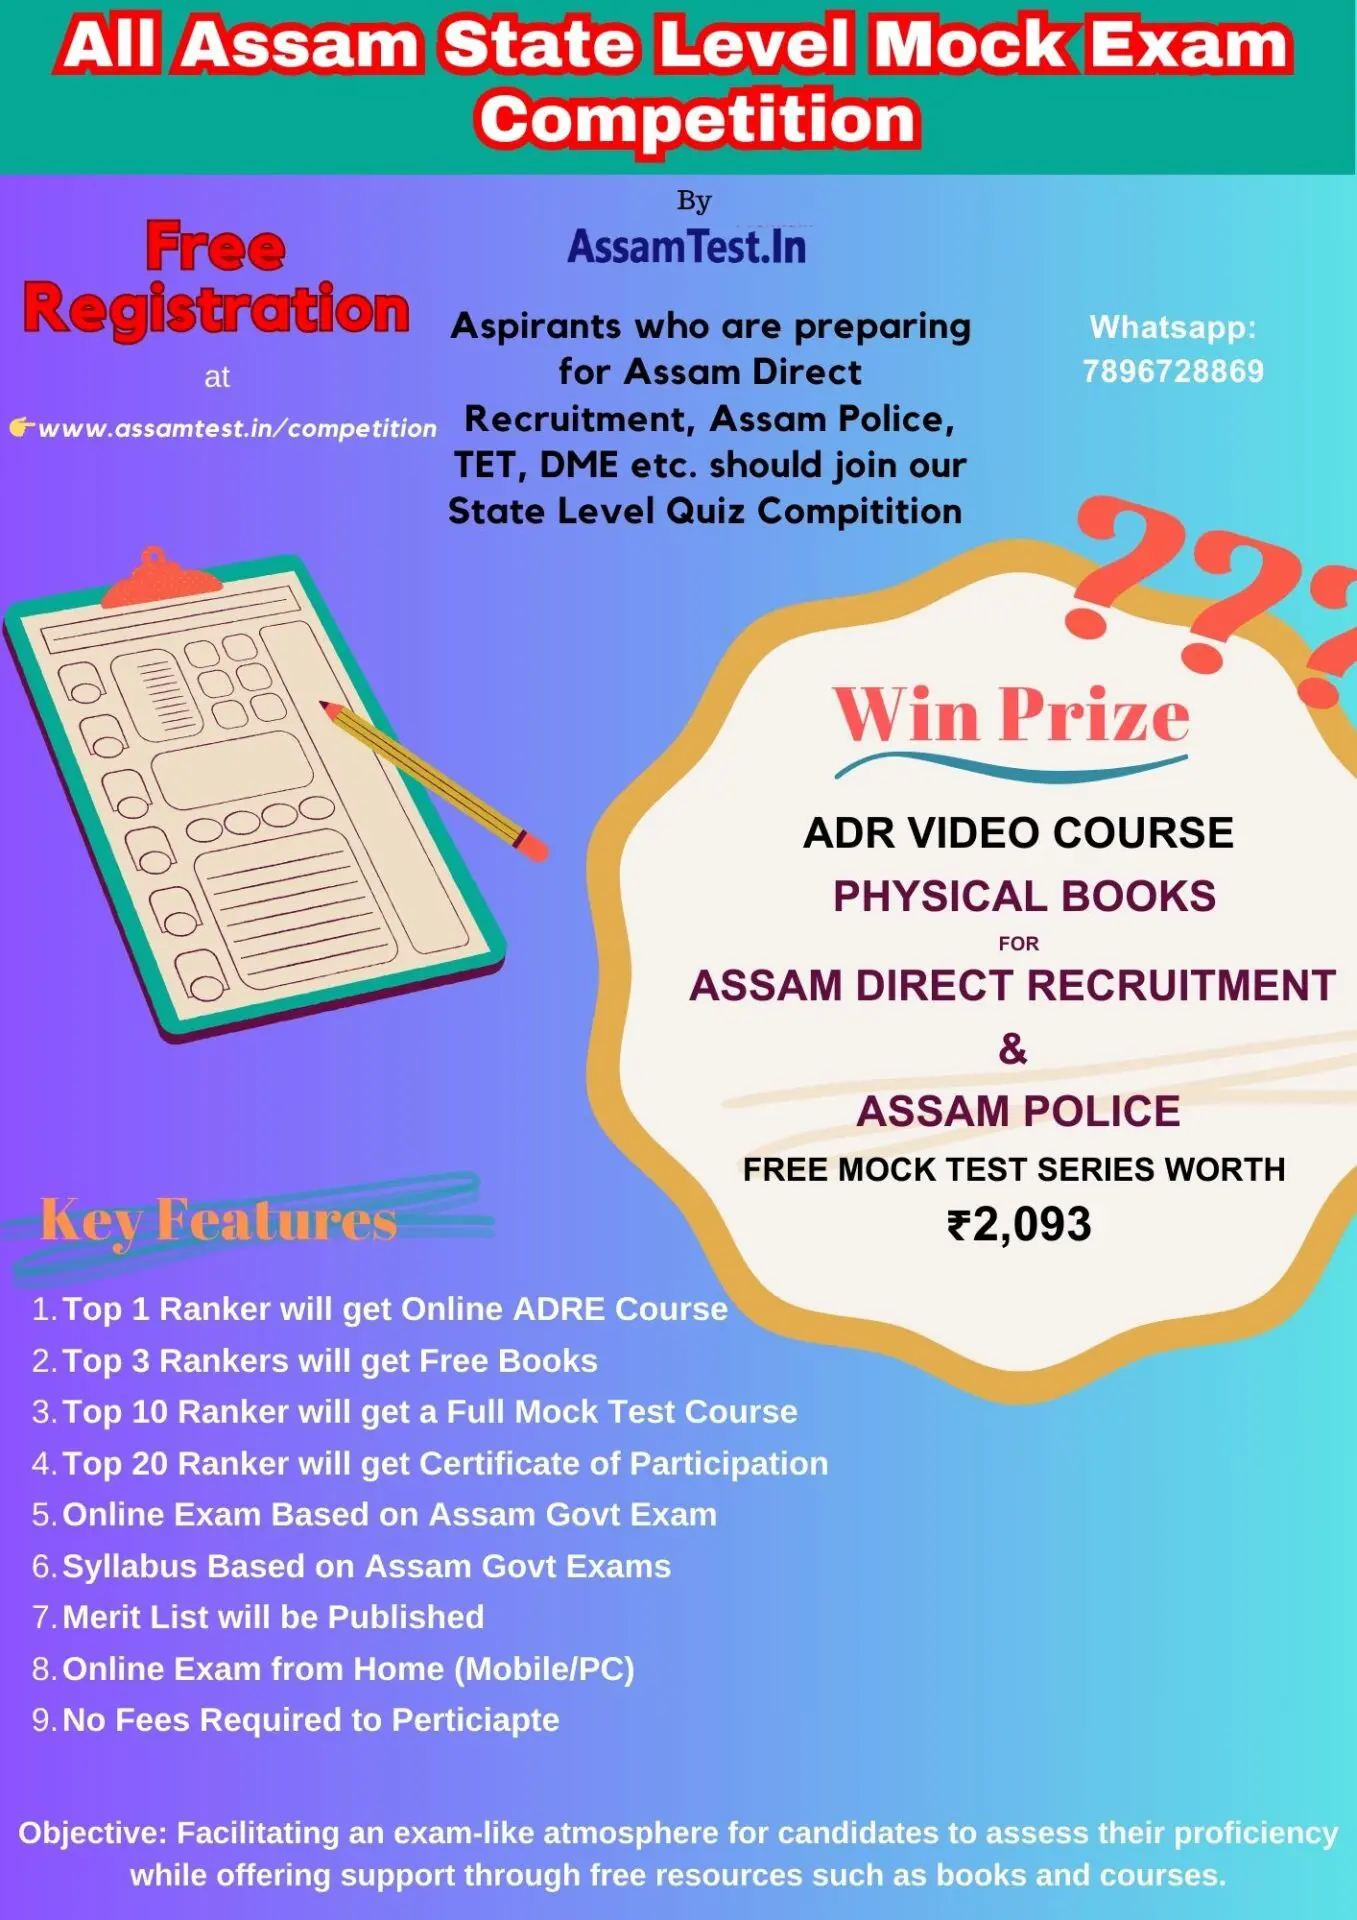 All Assam State Level Mock Exam Competition